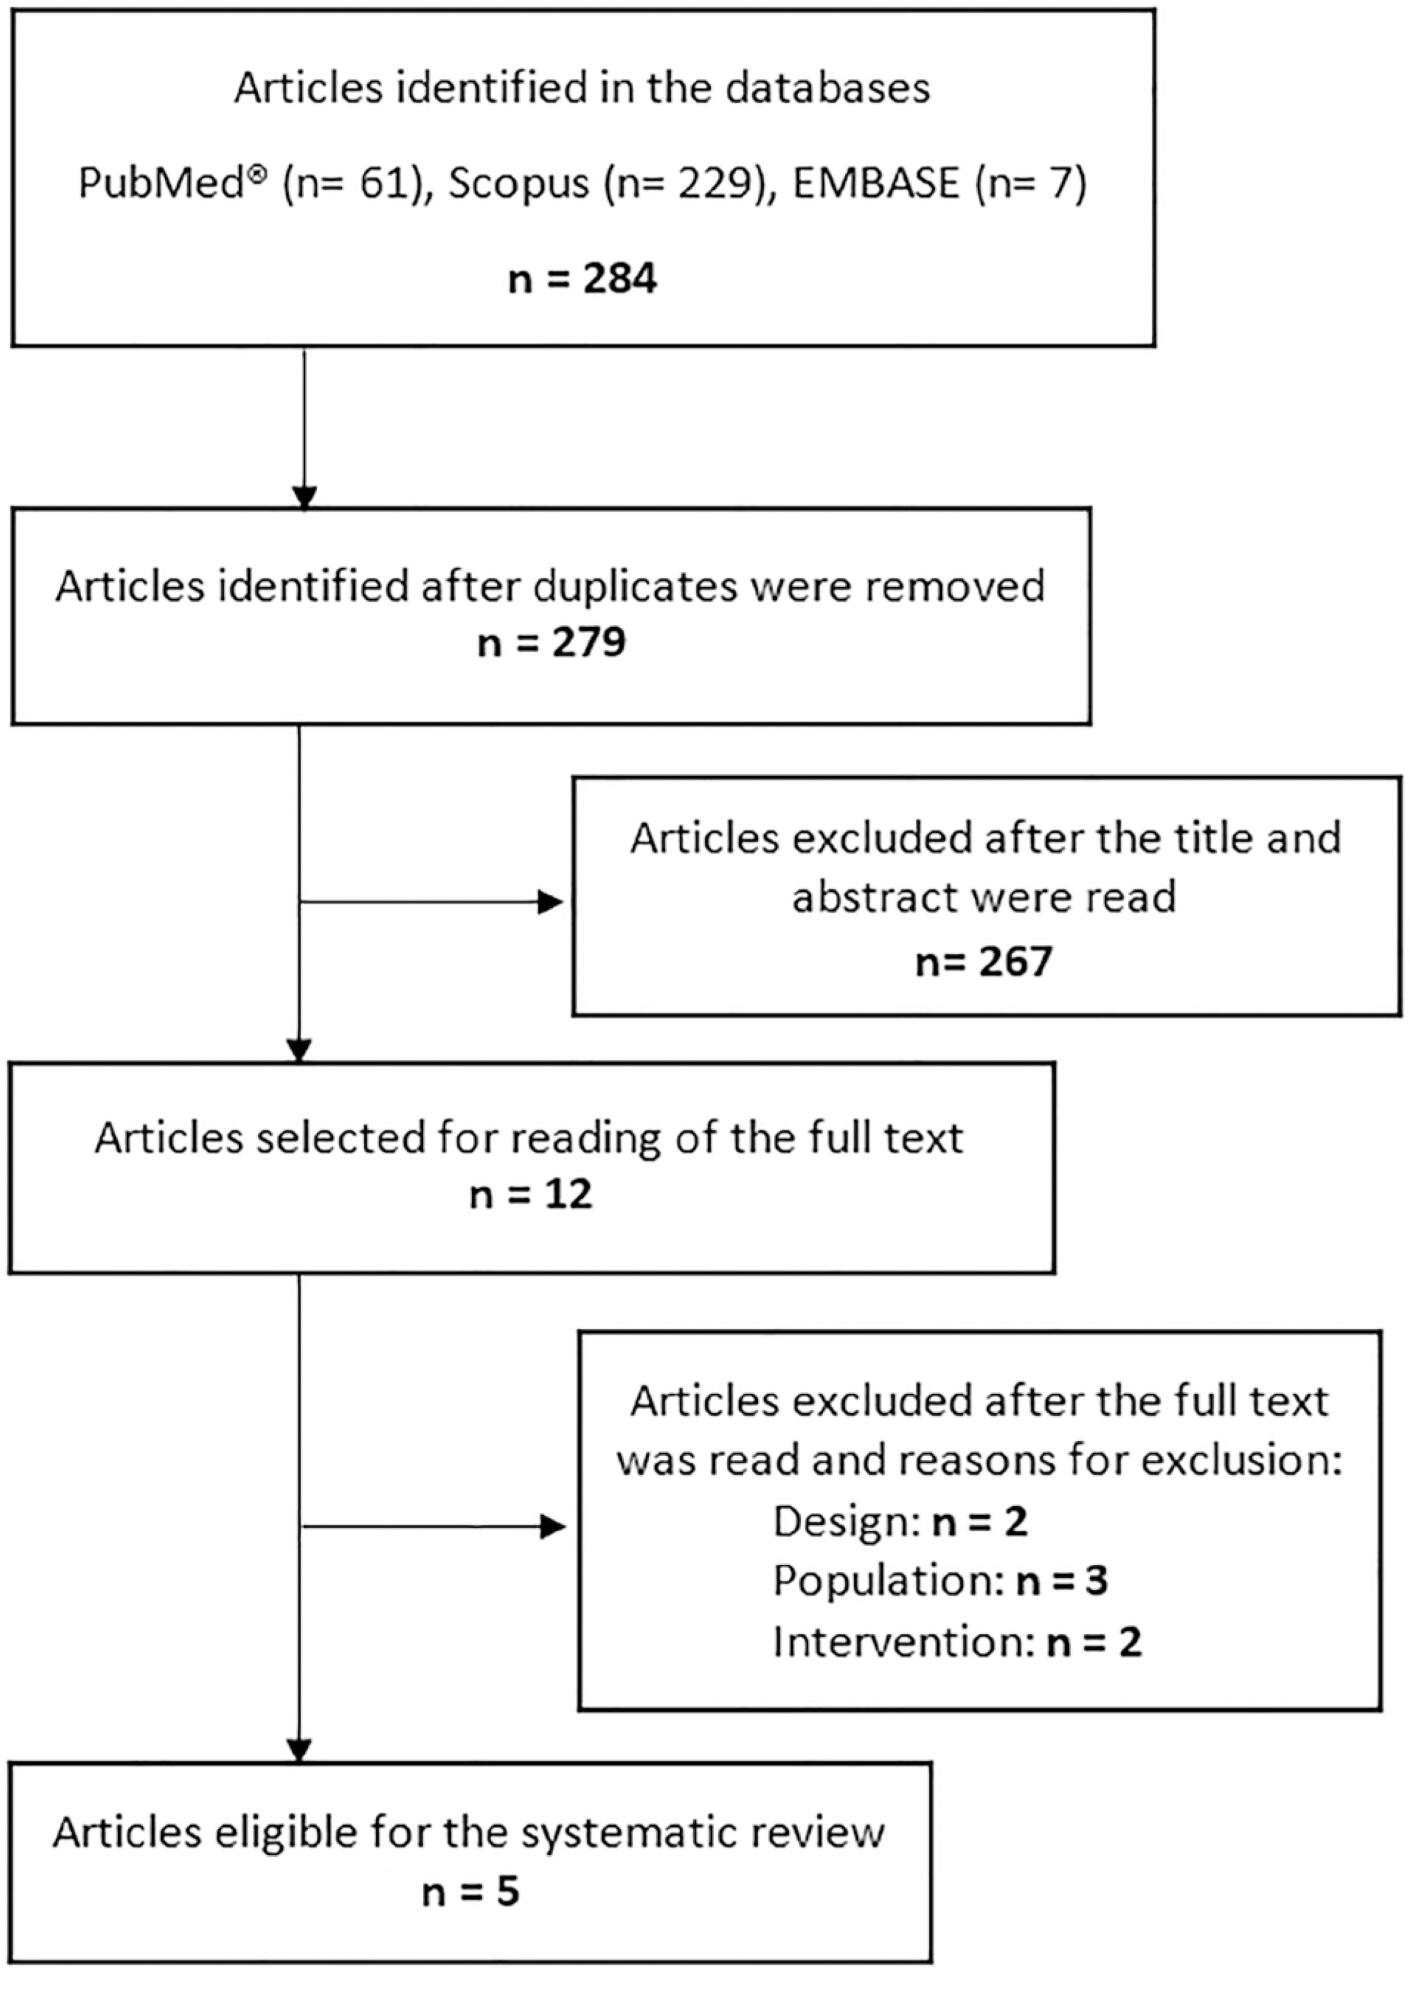 Administration of enteral nutrition in the prone position, gastric residual volume and other clinical outcomes in critically ill patients: a systematic review